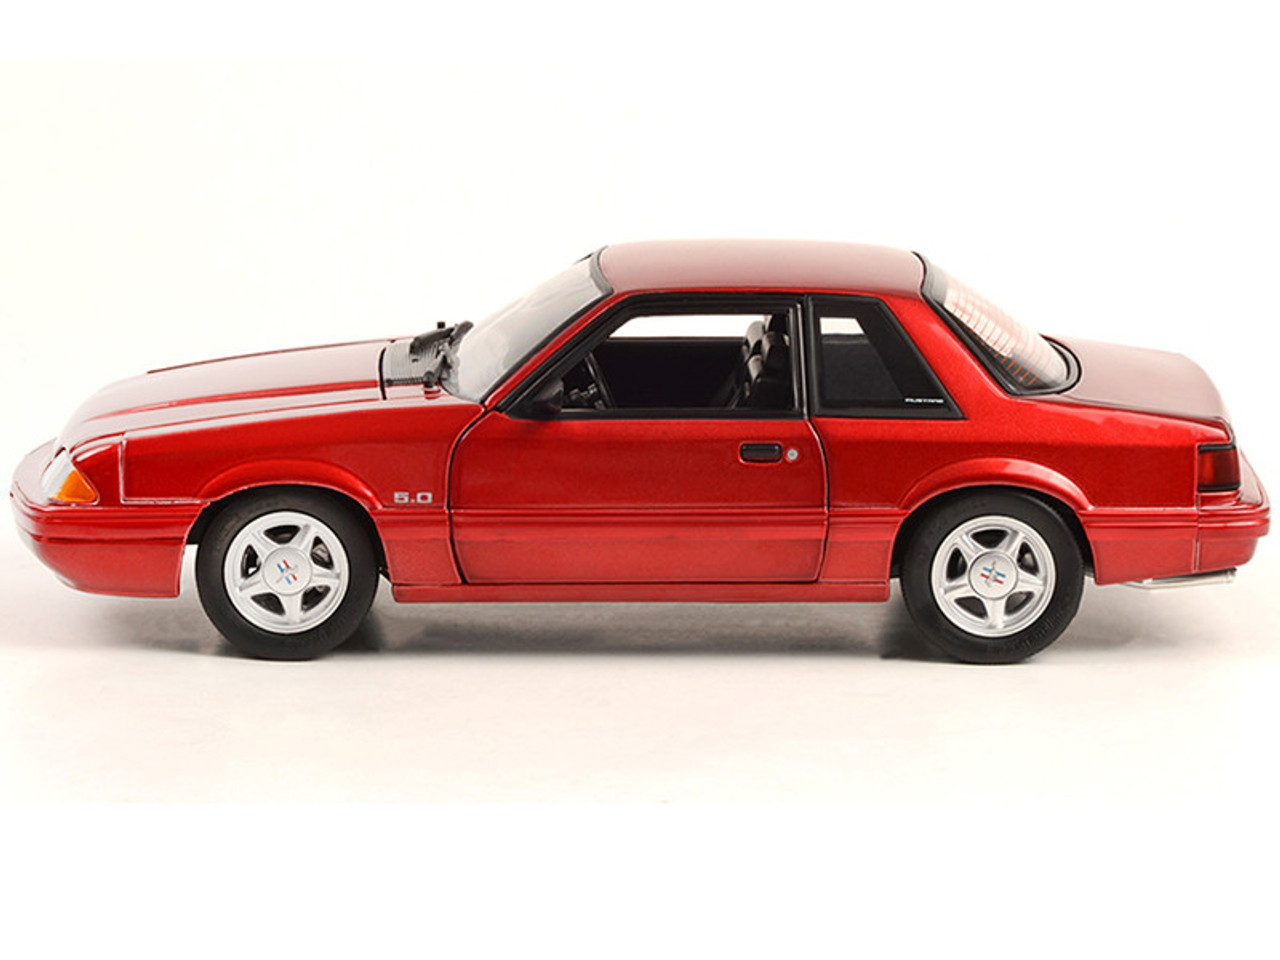 1993 Ford Mustang LX 5.0 - Electric Red with Black Interior - 1:18 Diecast Model Car by GMP